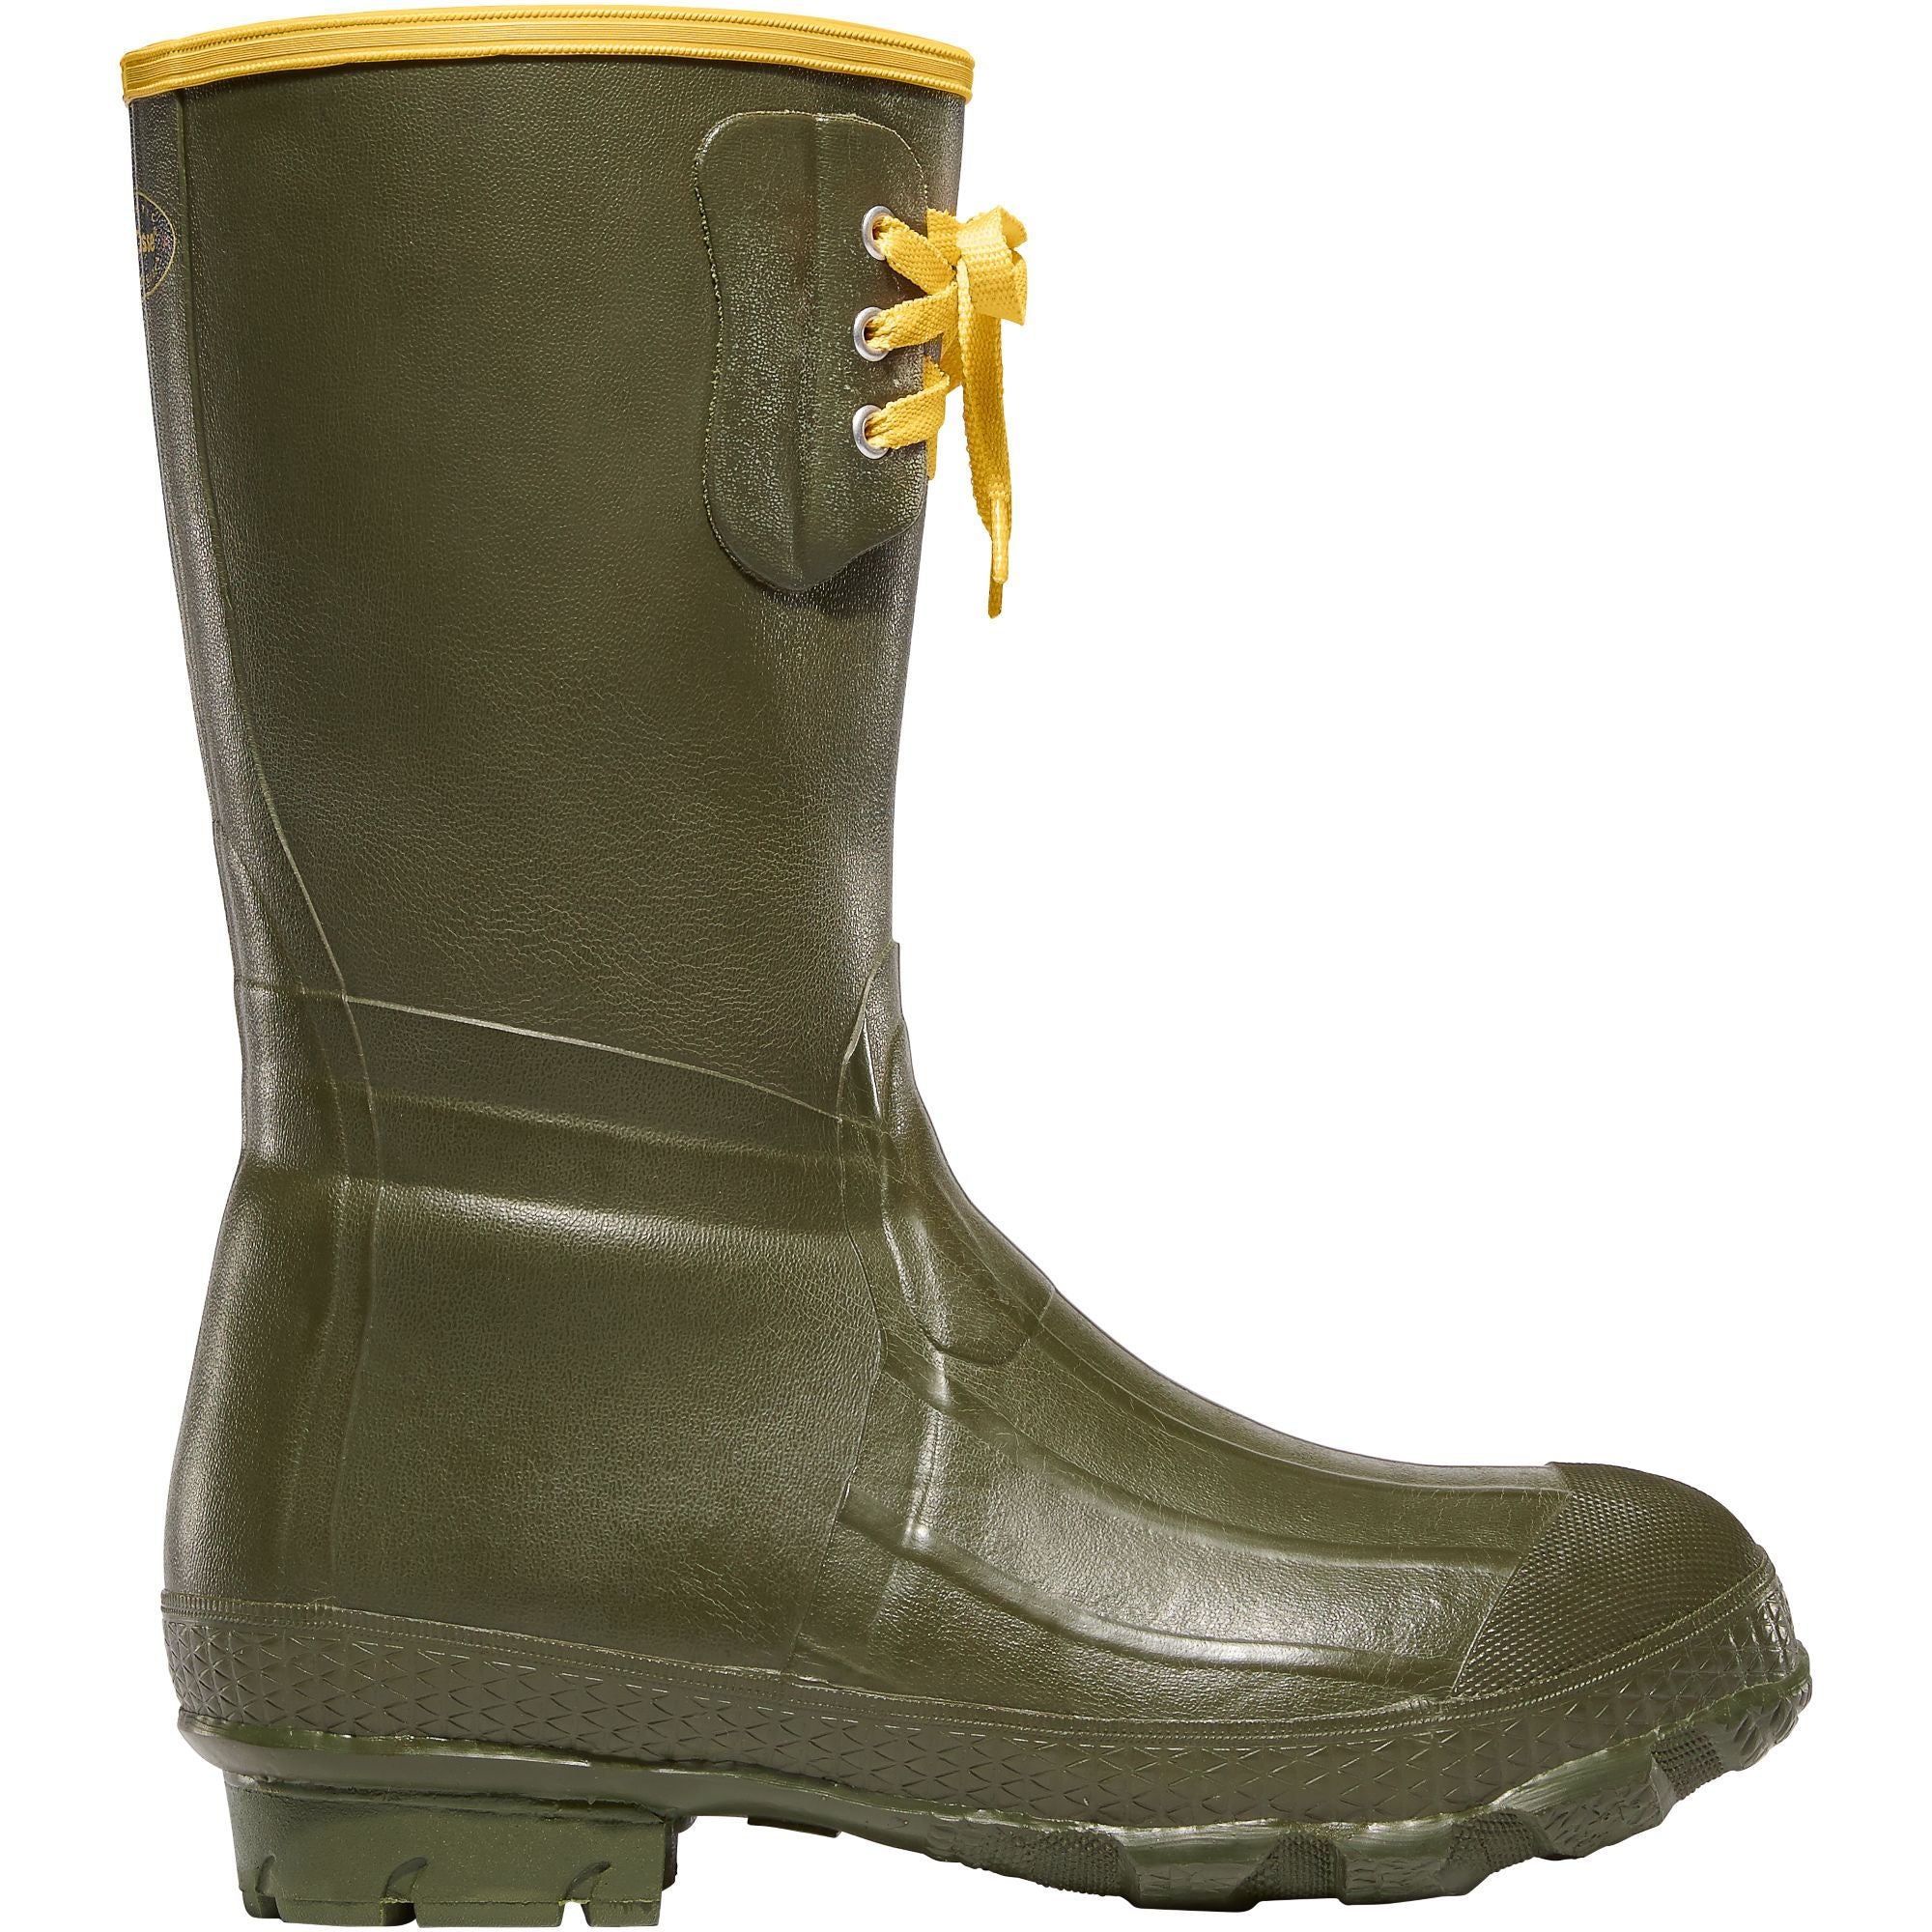 LaCrosse Men's Insulated Pac 12" Rubber Work Boot - Green - 260040 7 / Green - Overlook Boots